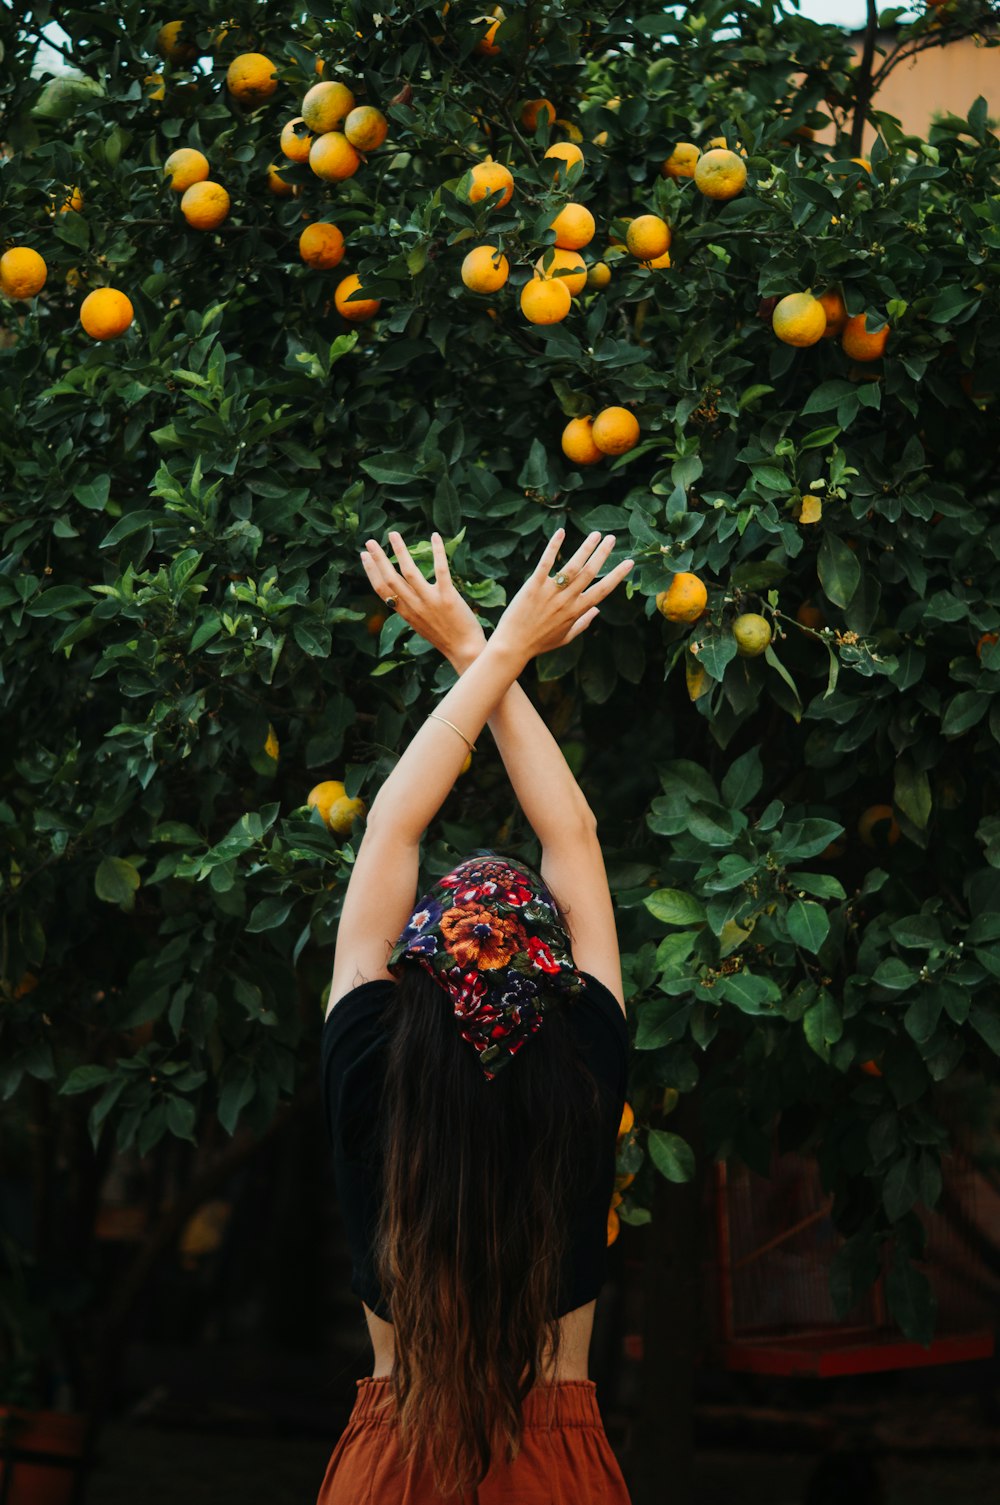 a woman standing in front of a tree with oranges on it